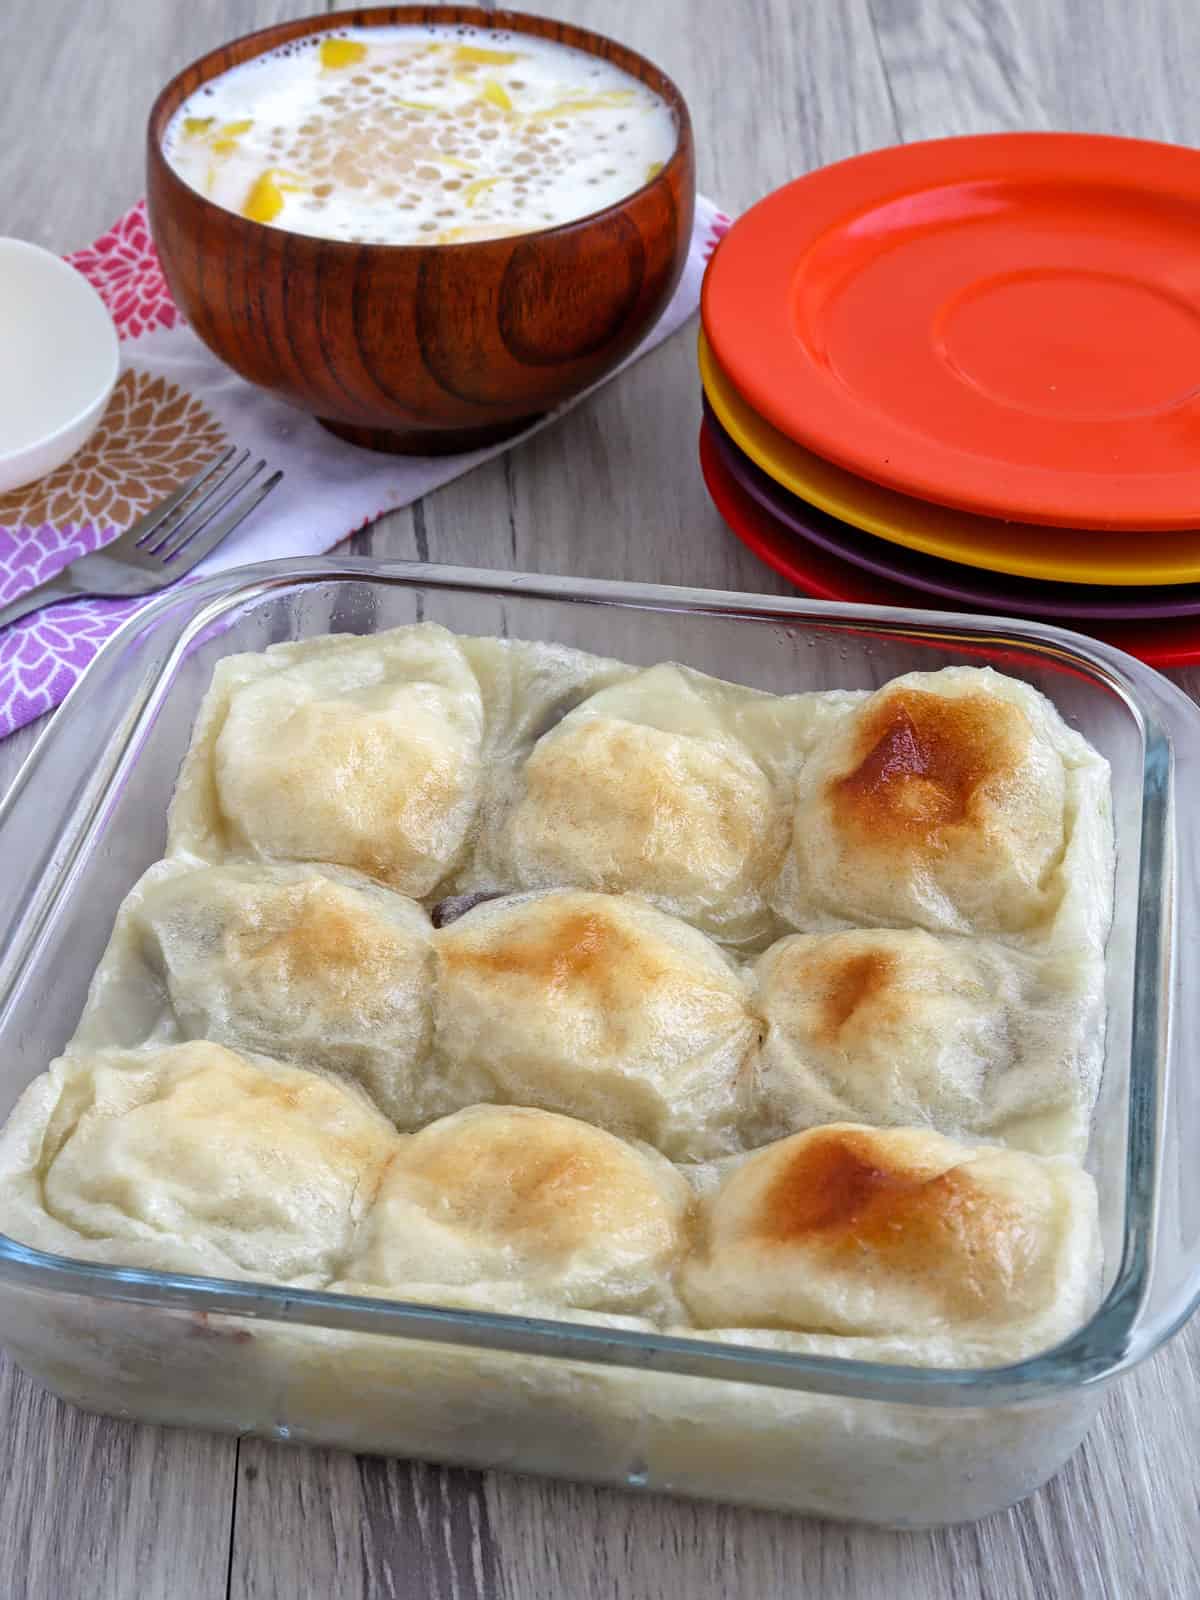 baked sticky rice dumplings in a baking dish.